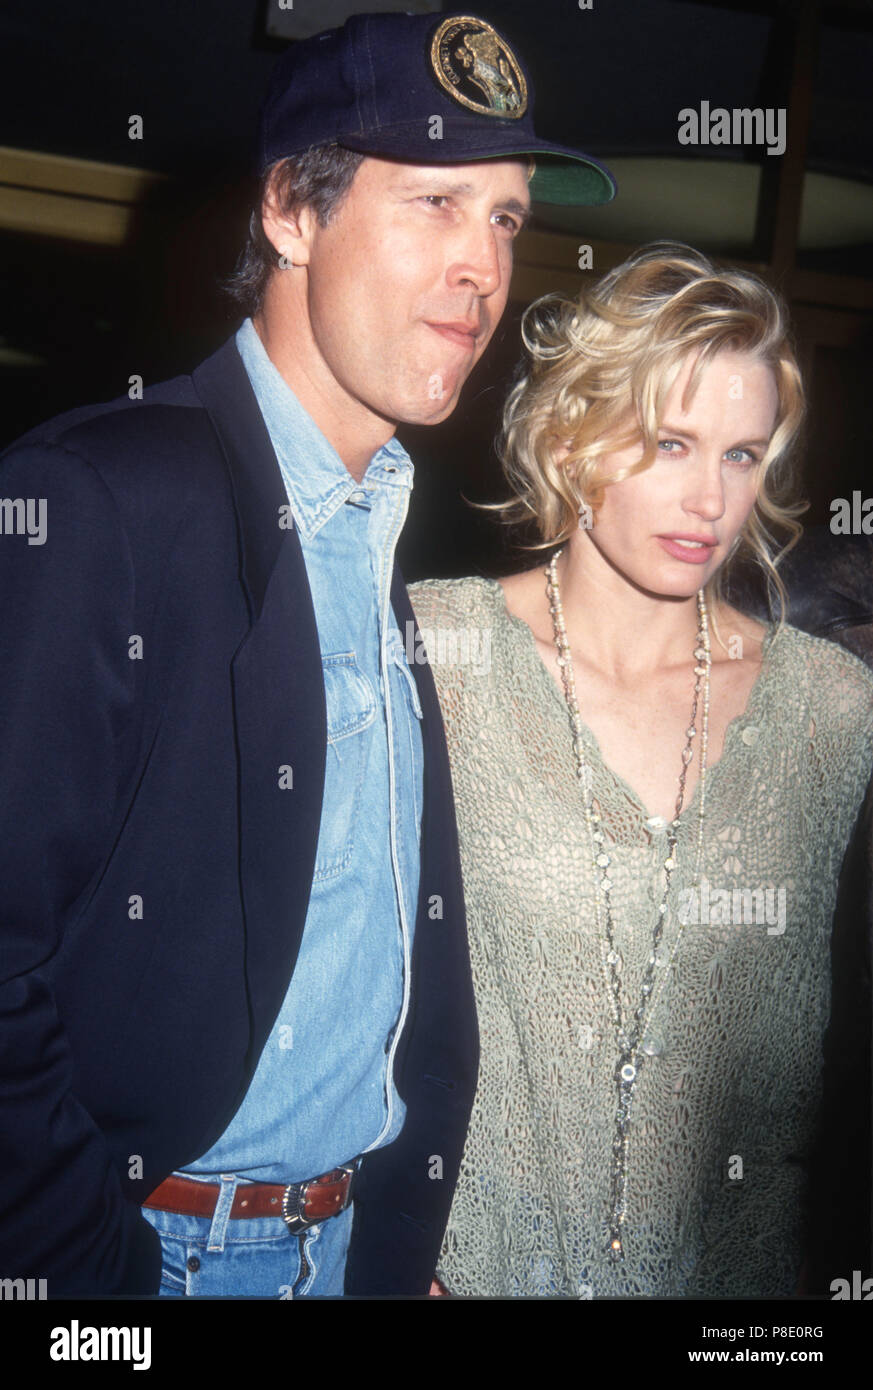 WESTWOOD, CA - FEBRUARY 25: (L-R) Actor Chevy Chase and actress Daryl Hannah attend 'Memoirs of an Invisible Man' Premiere on February 25, 1992 at Mann's National Theater in Westwood, California. Photo by Barry King/Alamy Stock Photo Stock Photo